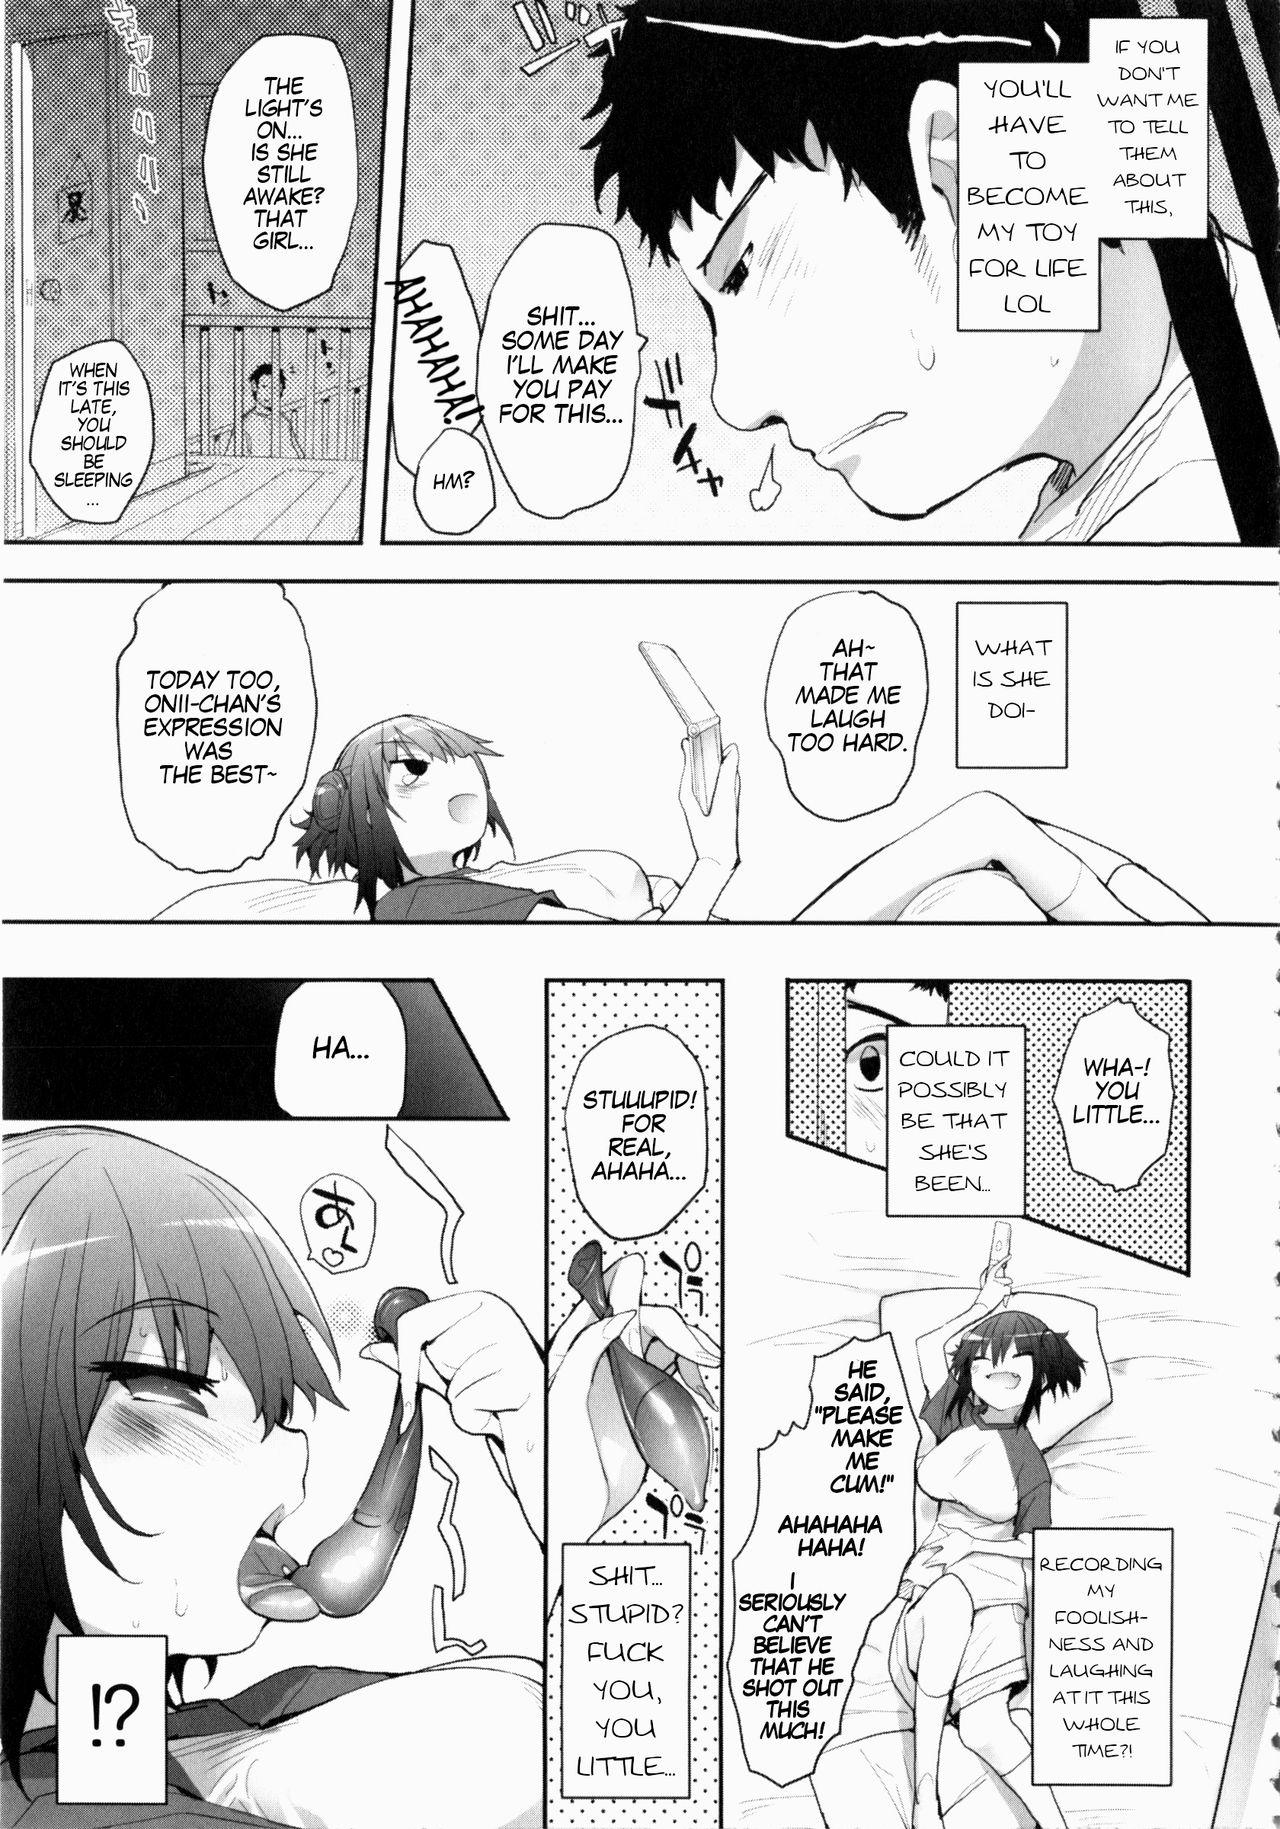 Hot Naked Girl Imouto no Tabekata Submission - Page 5